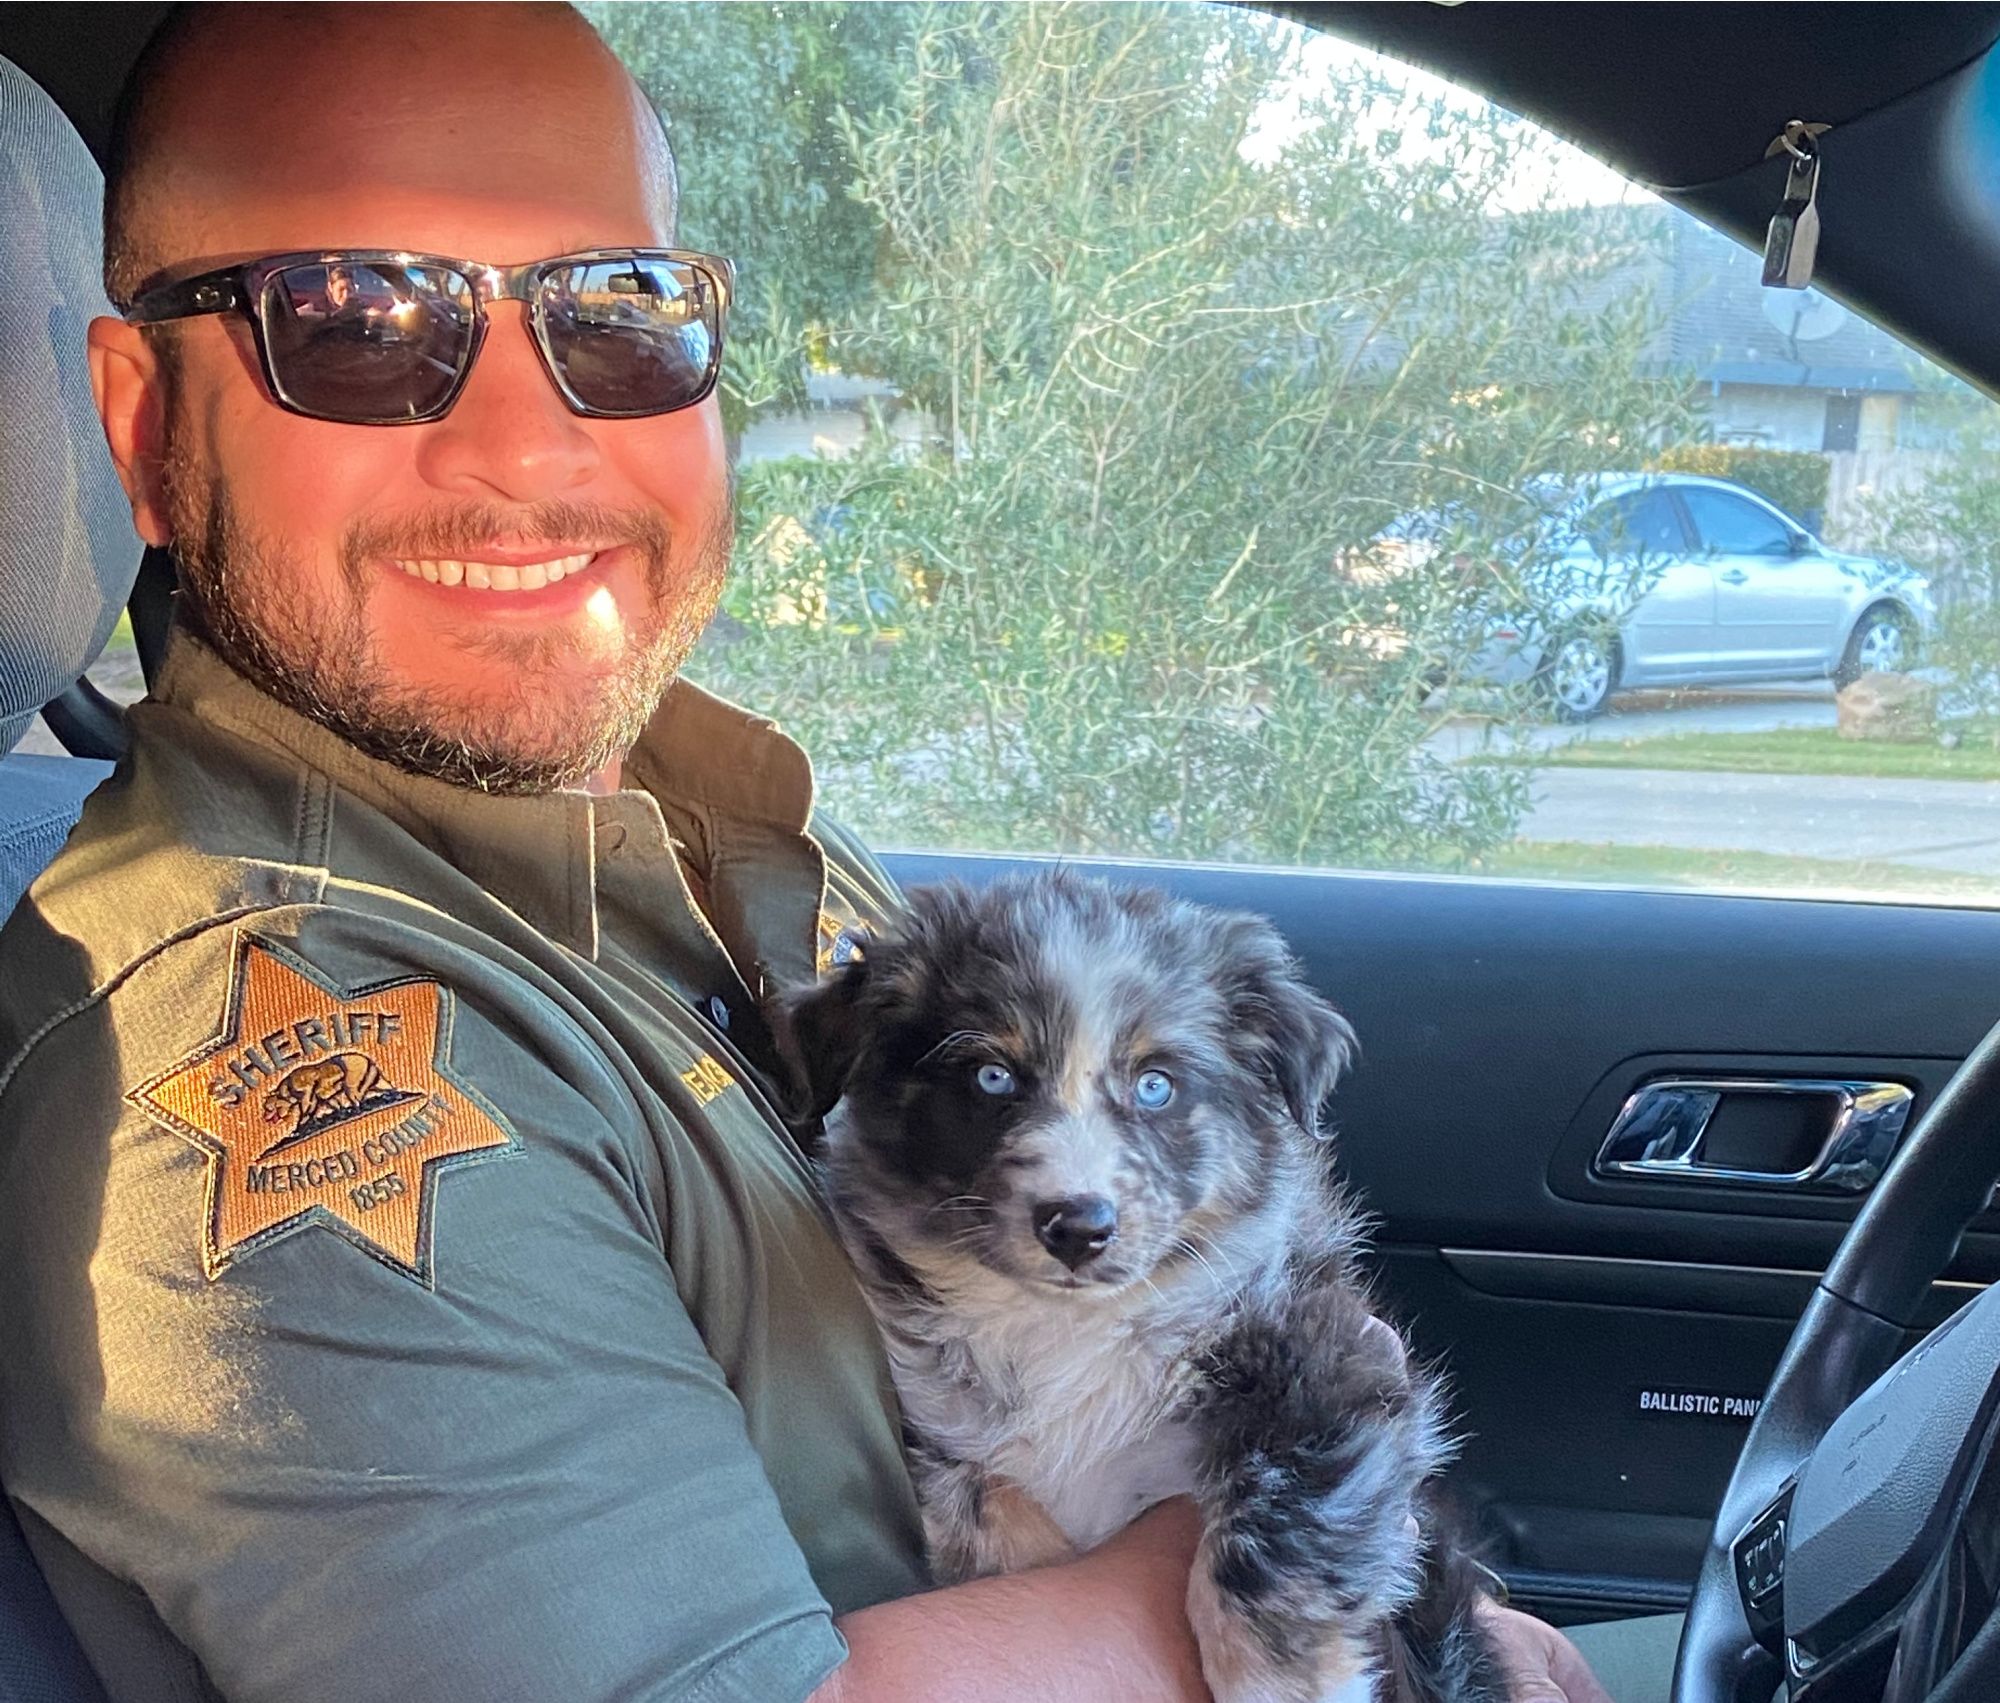 Officer Javier Arteaga with a puppy in his squad car